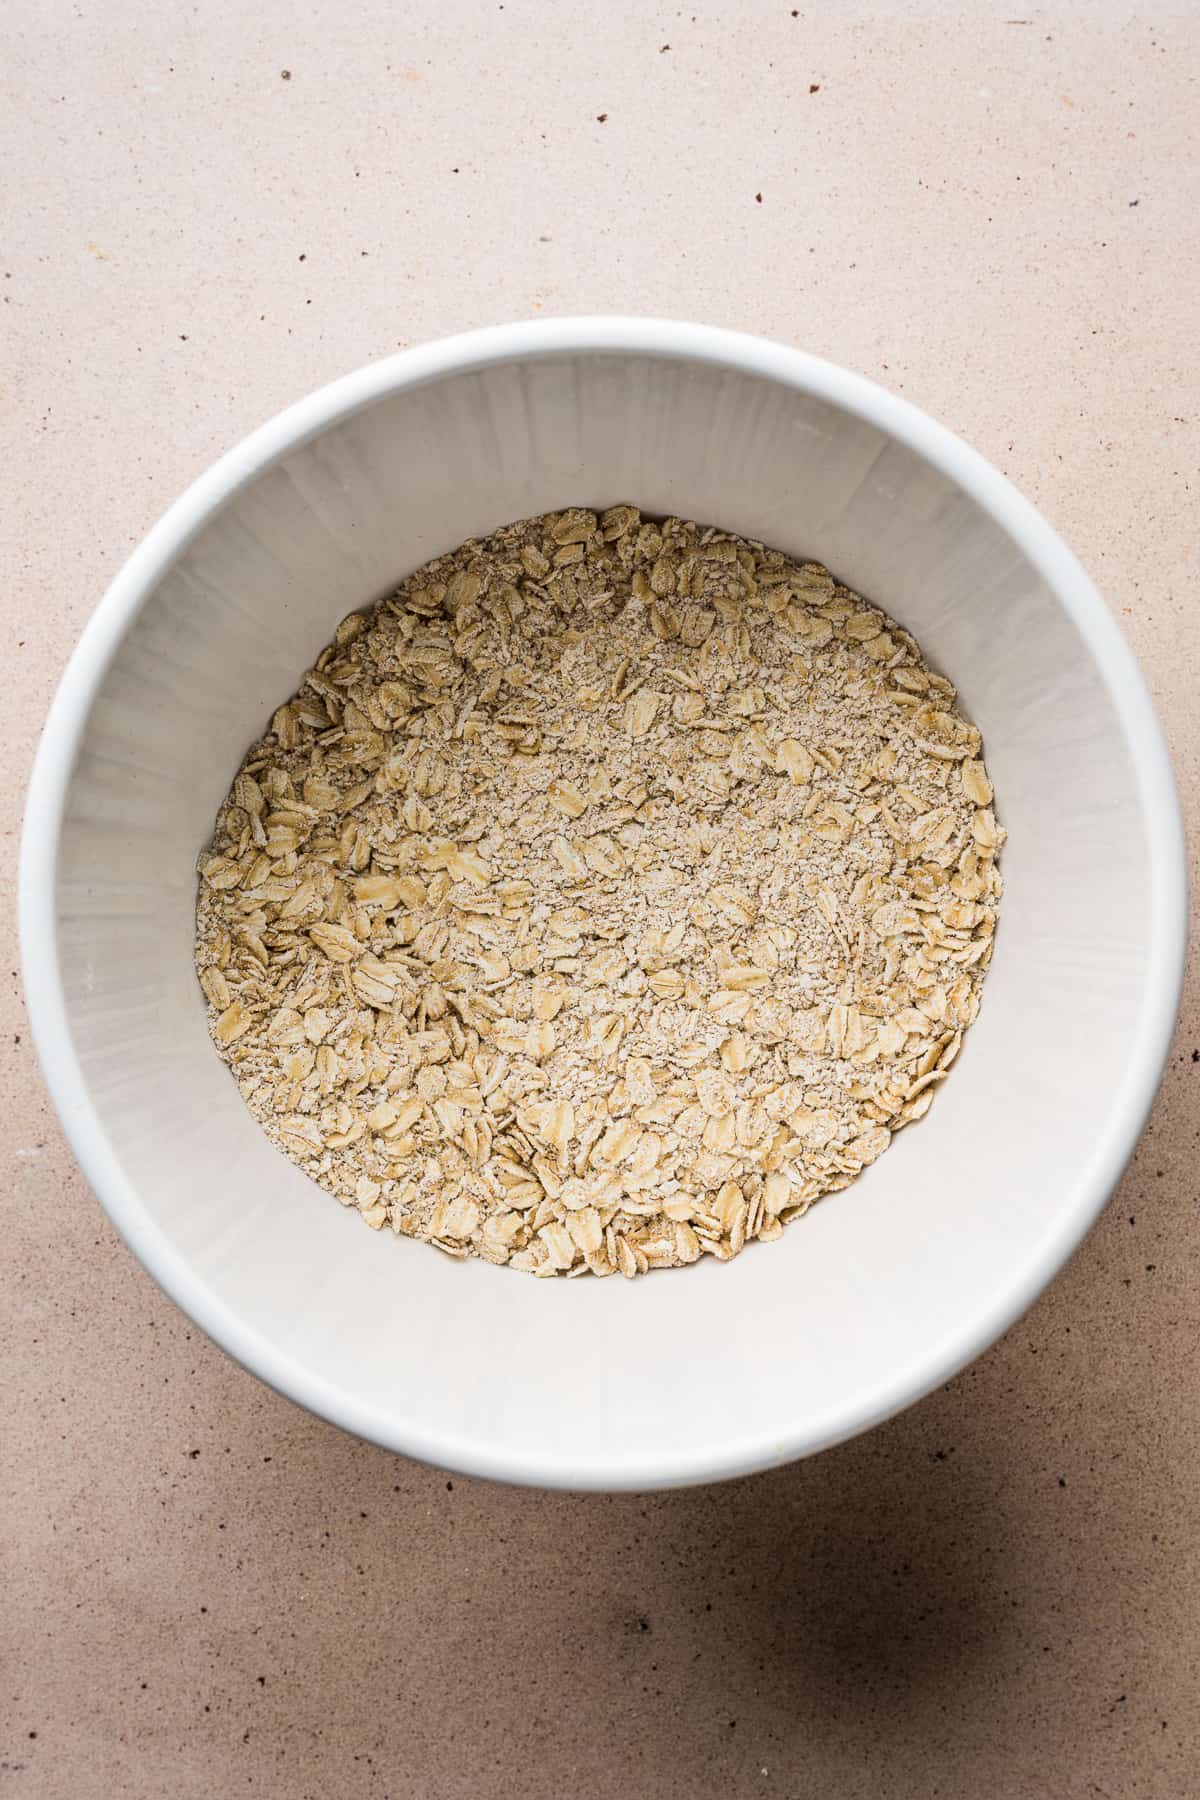 Ground oats, whole rolled oats, baking powder, ground cinnamon, and ground cloves in a mixing bowl.